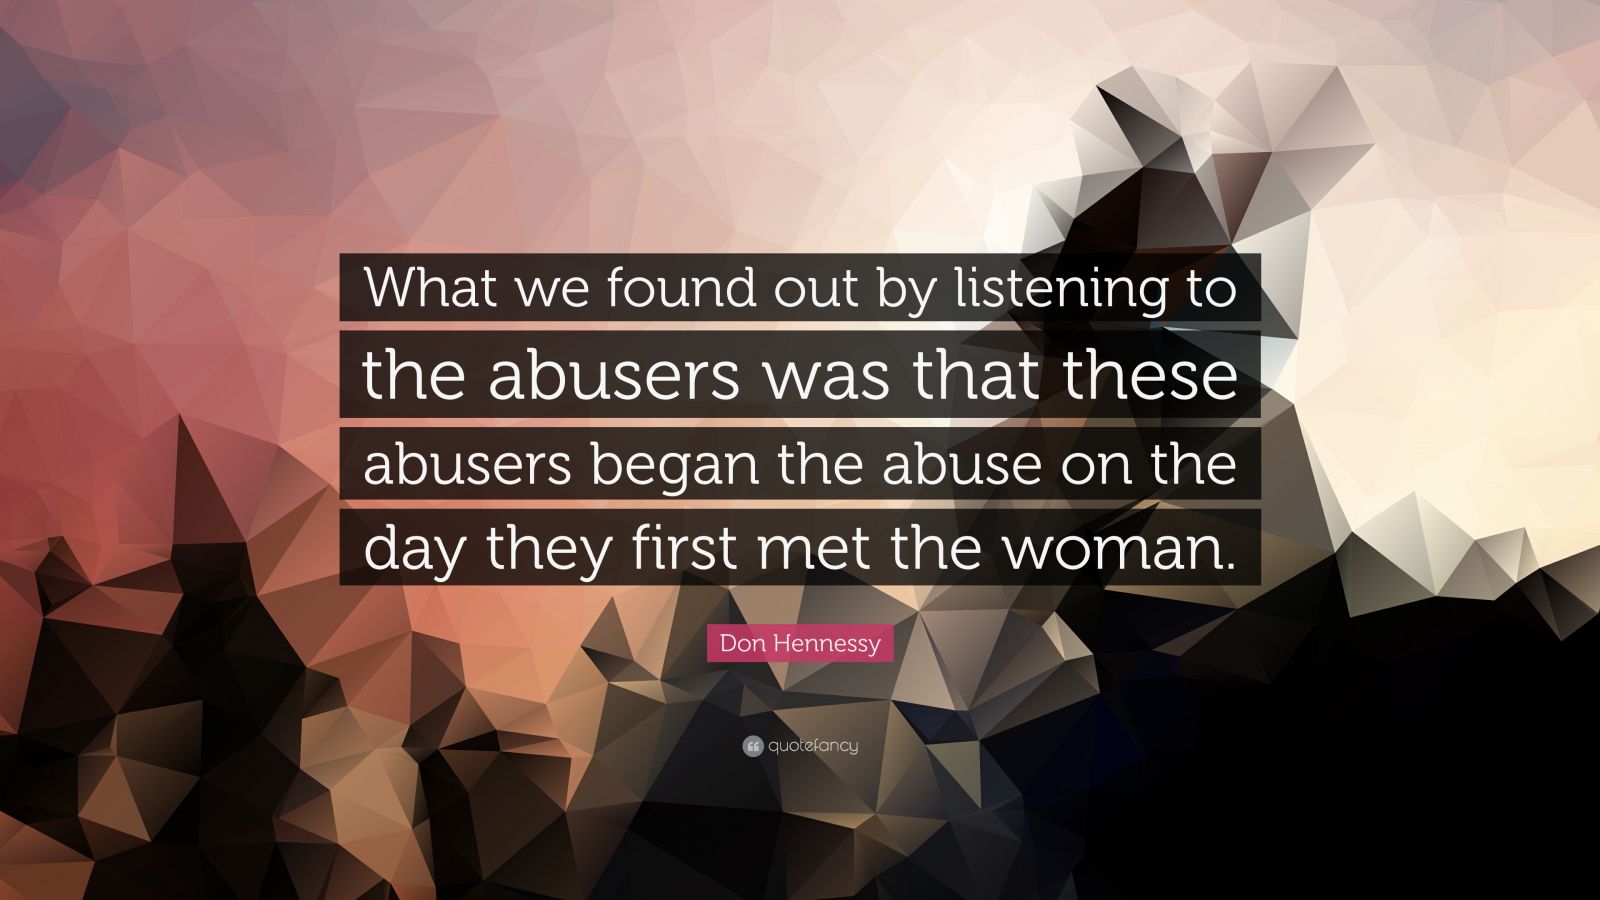 Don Hennessy Quote: “What we found out by listening to the abusers was ...